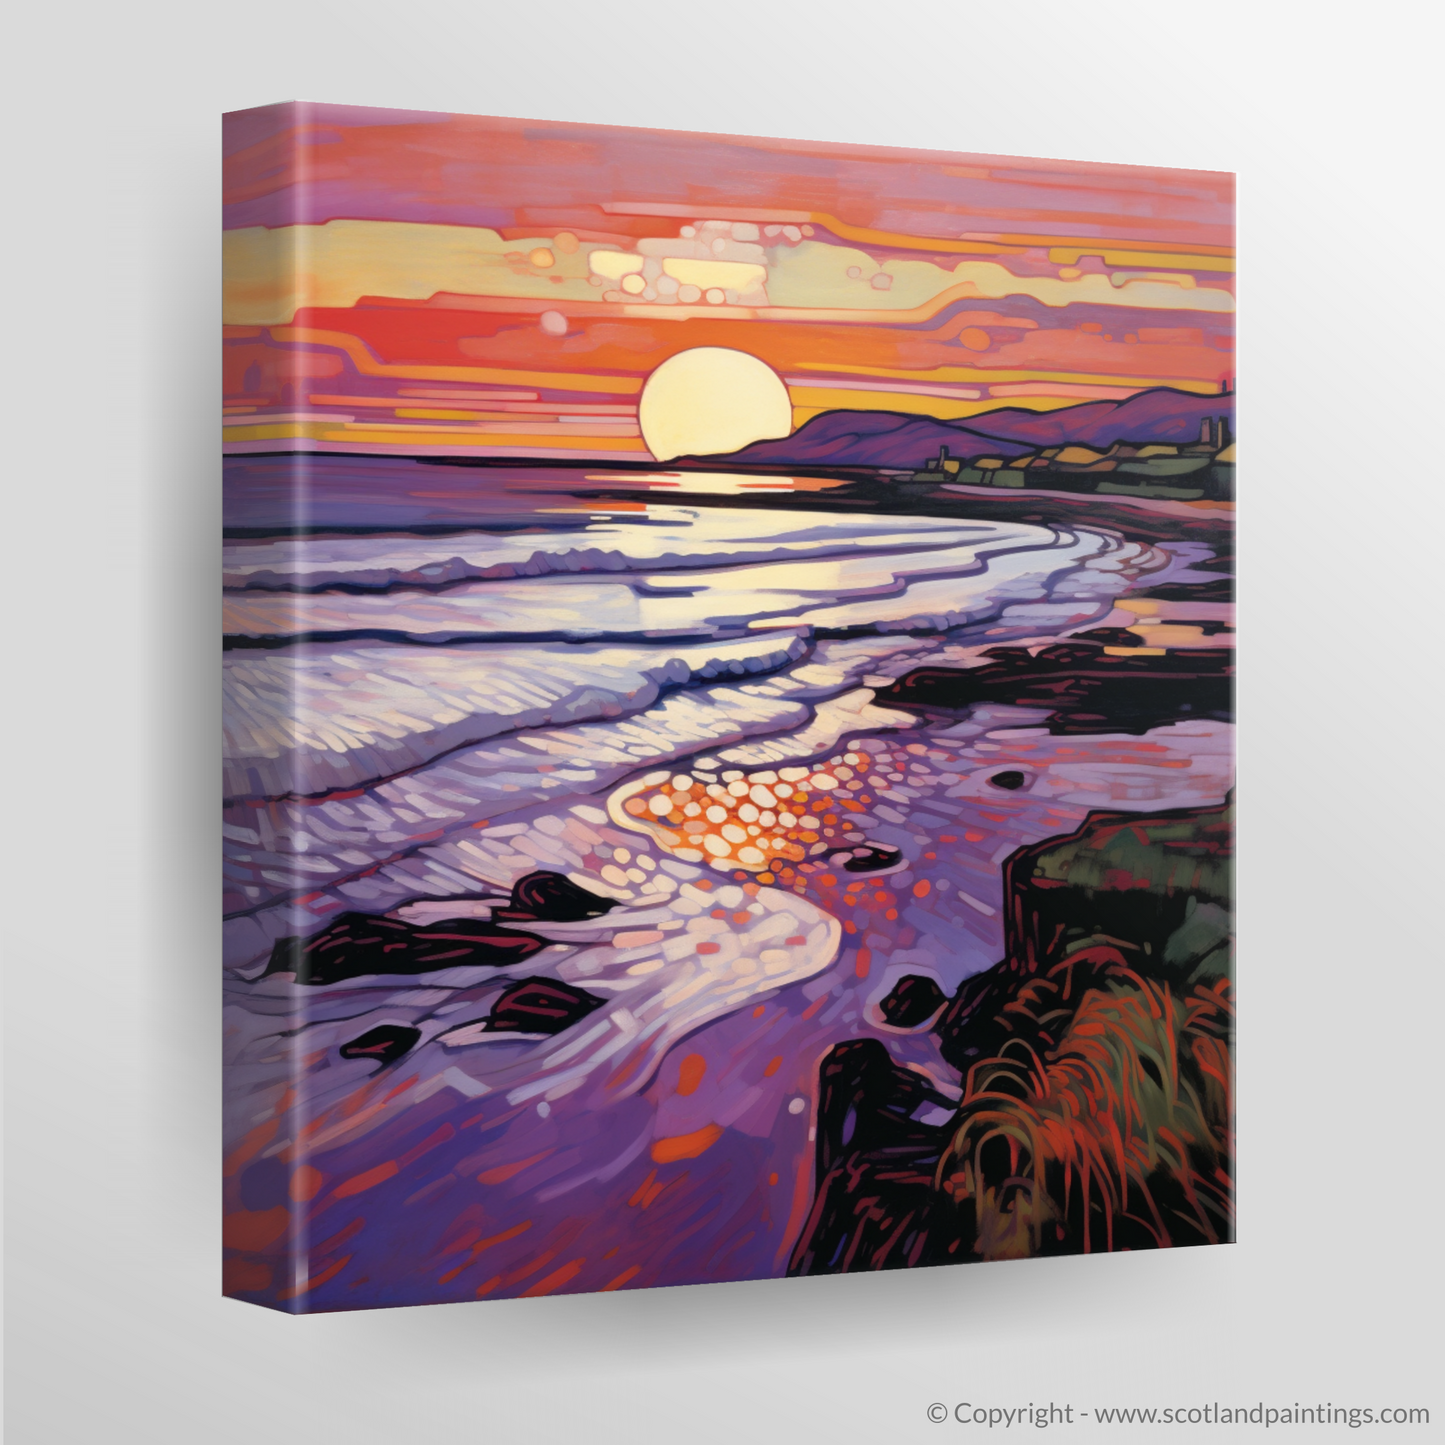 Coldingham Bay at Sunset: An Art Nouveau Ode to Tranquility